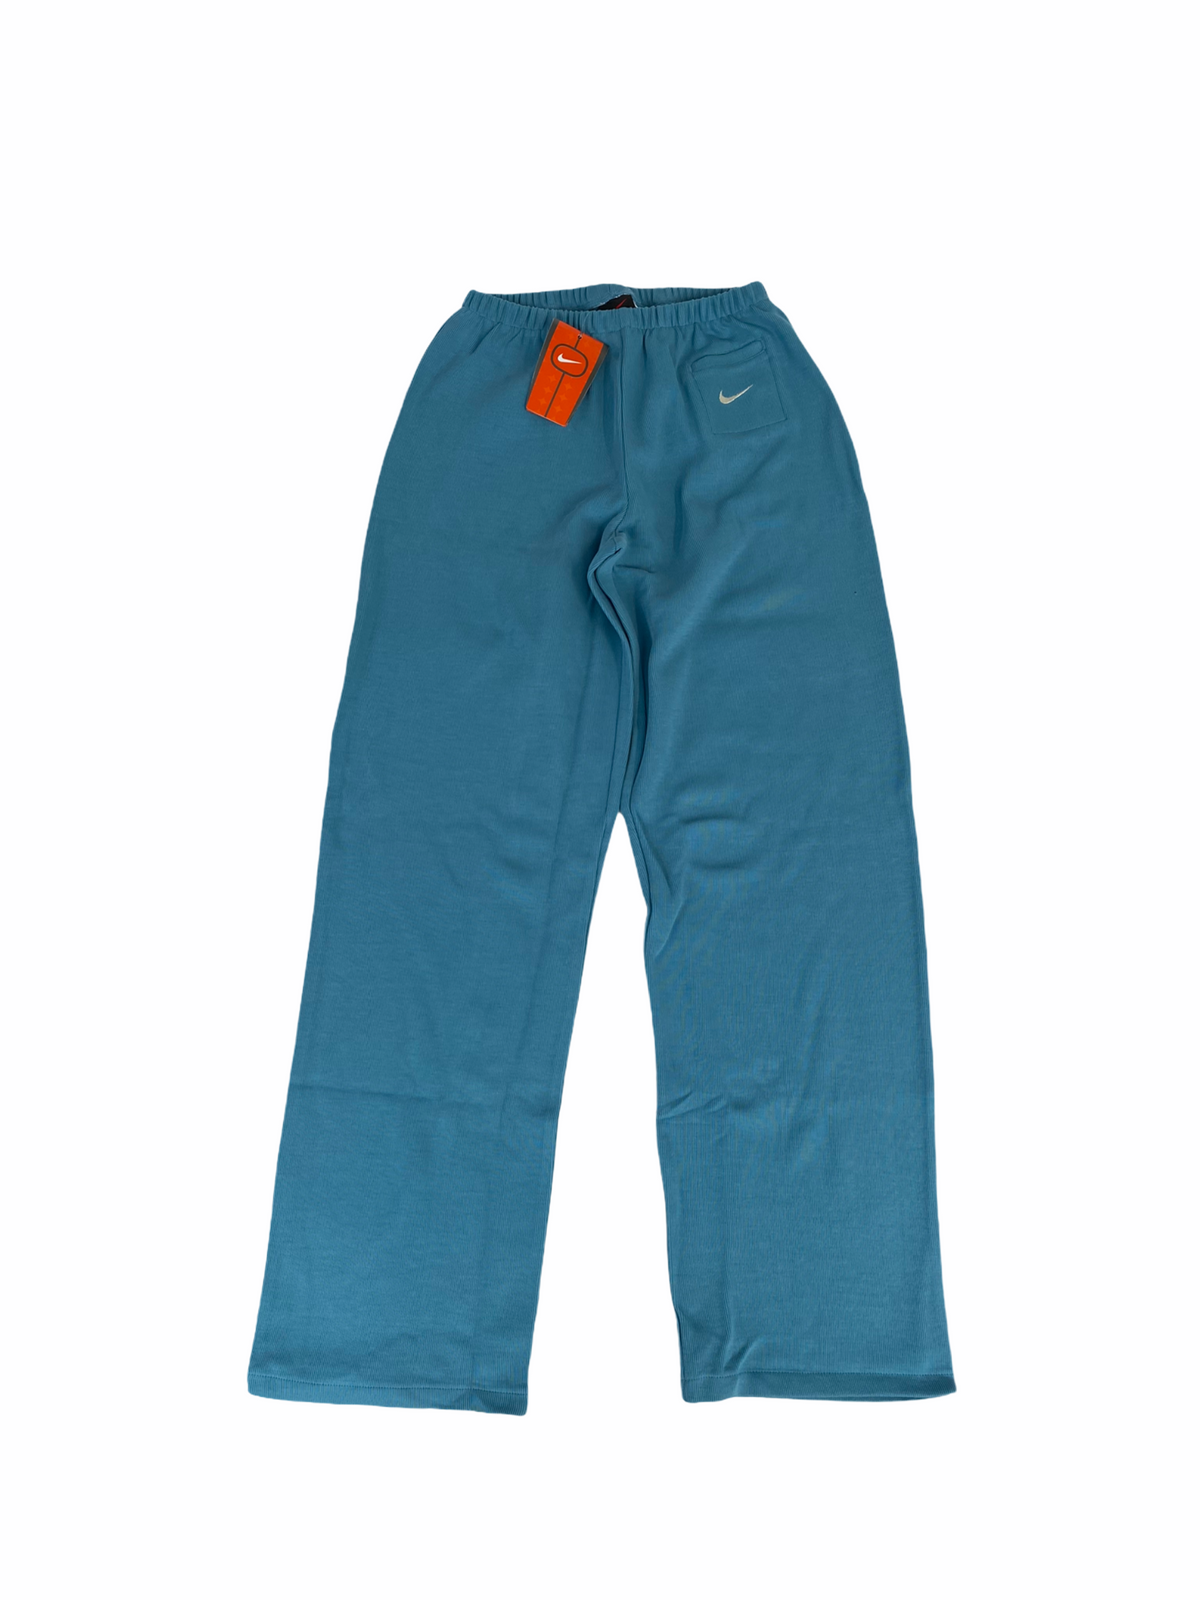 Early 2000's Women's Stretch Trousers in Light Blue - Not In Your Wardrobe™ - [Vendor]